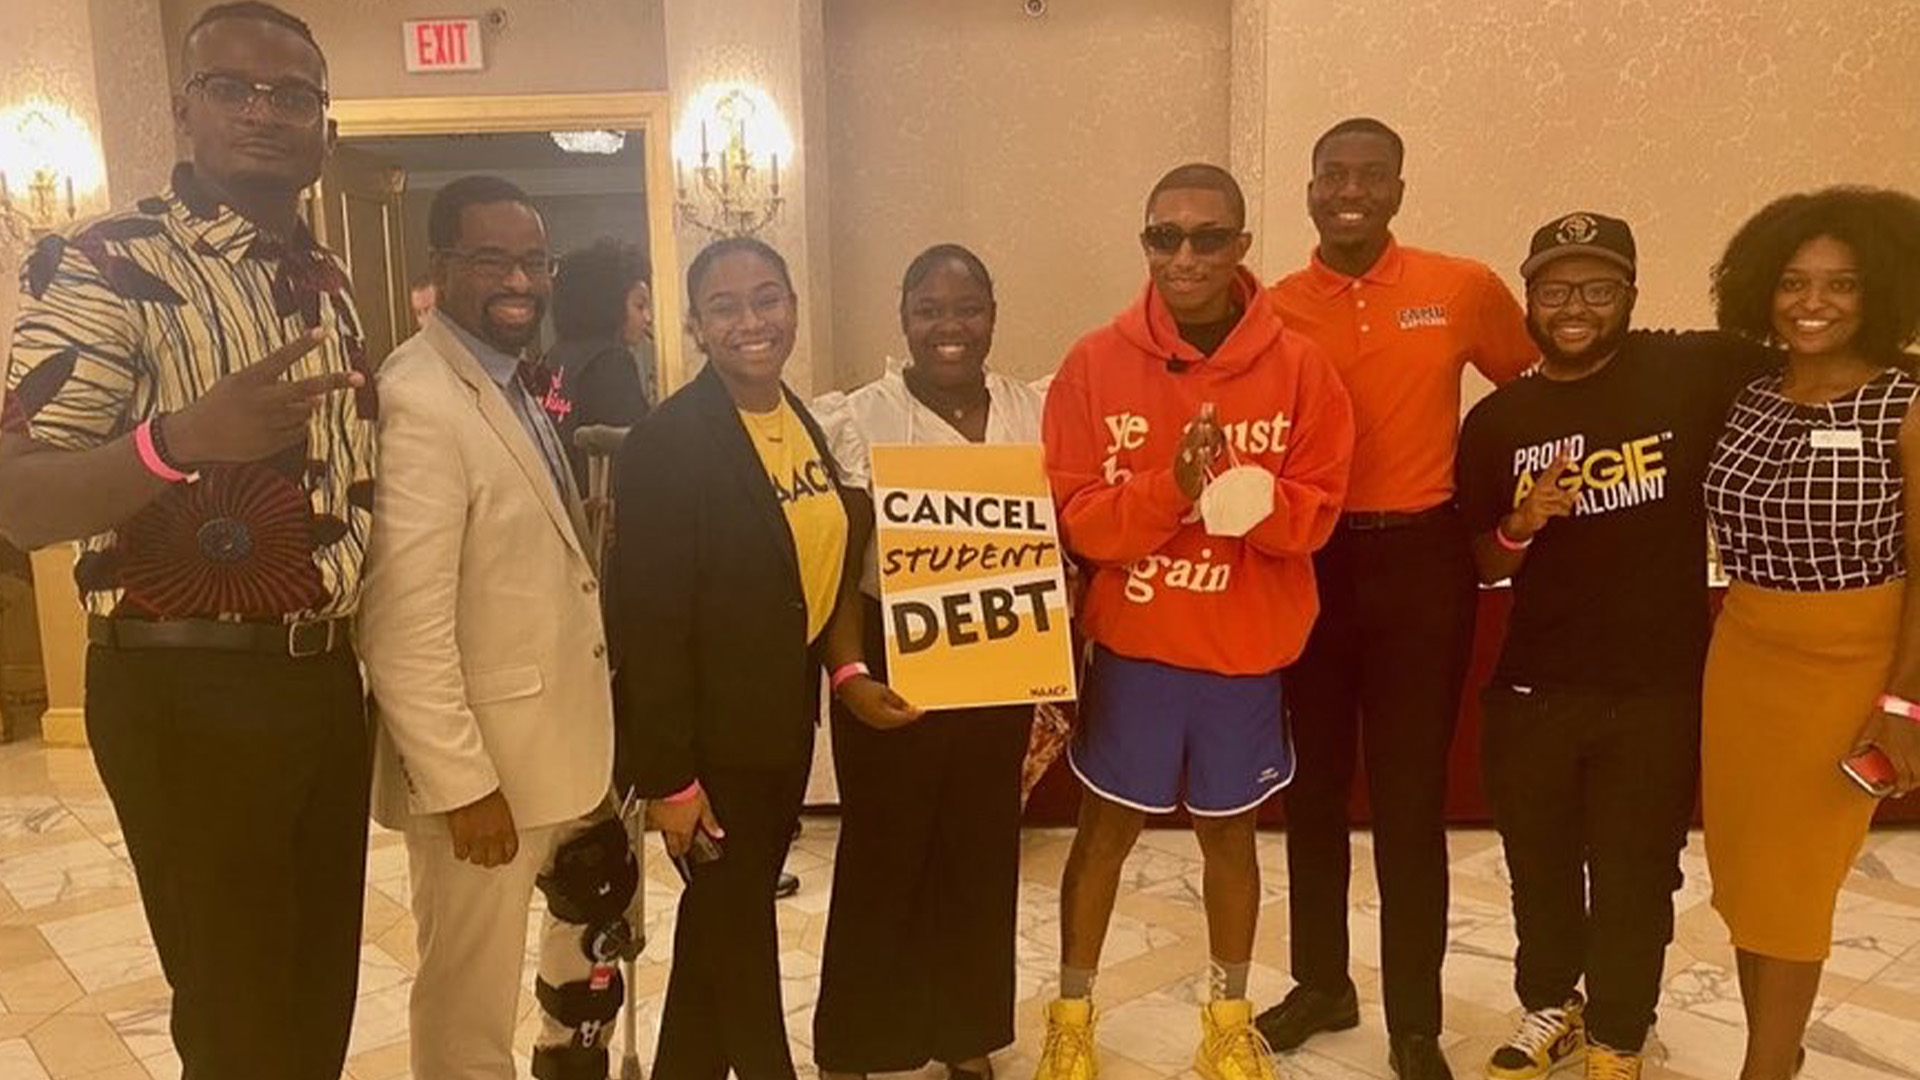 Recipients Of Pharrell Williams' Student Loan Forgiveness Gift Launch A Nonprofit To Provide Financial Literacy And Support To HBCUs